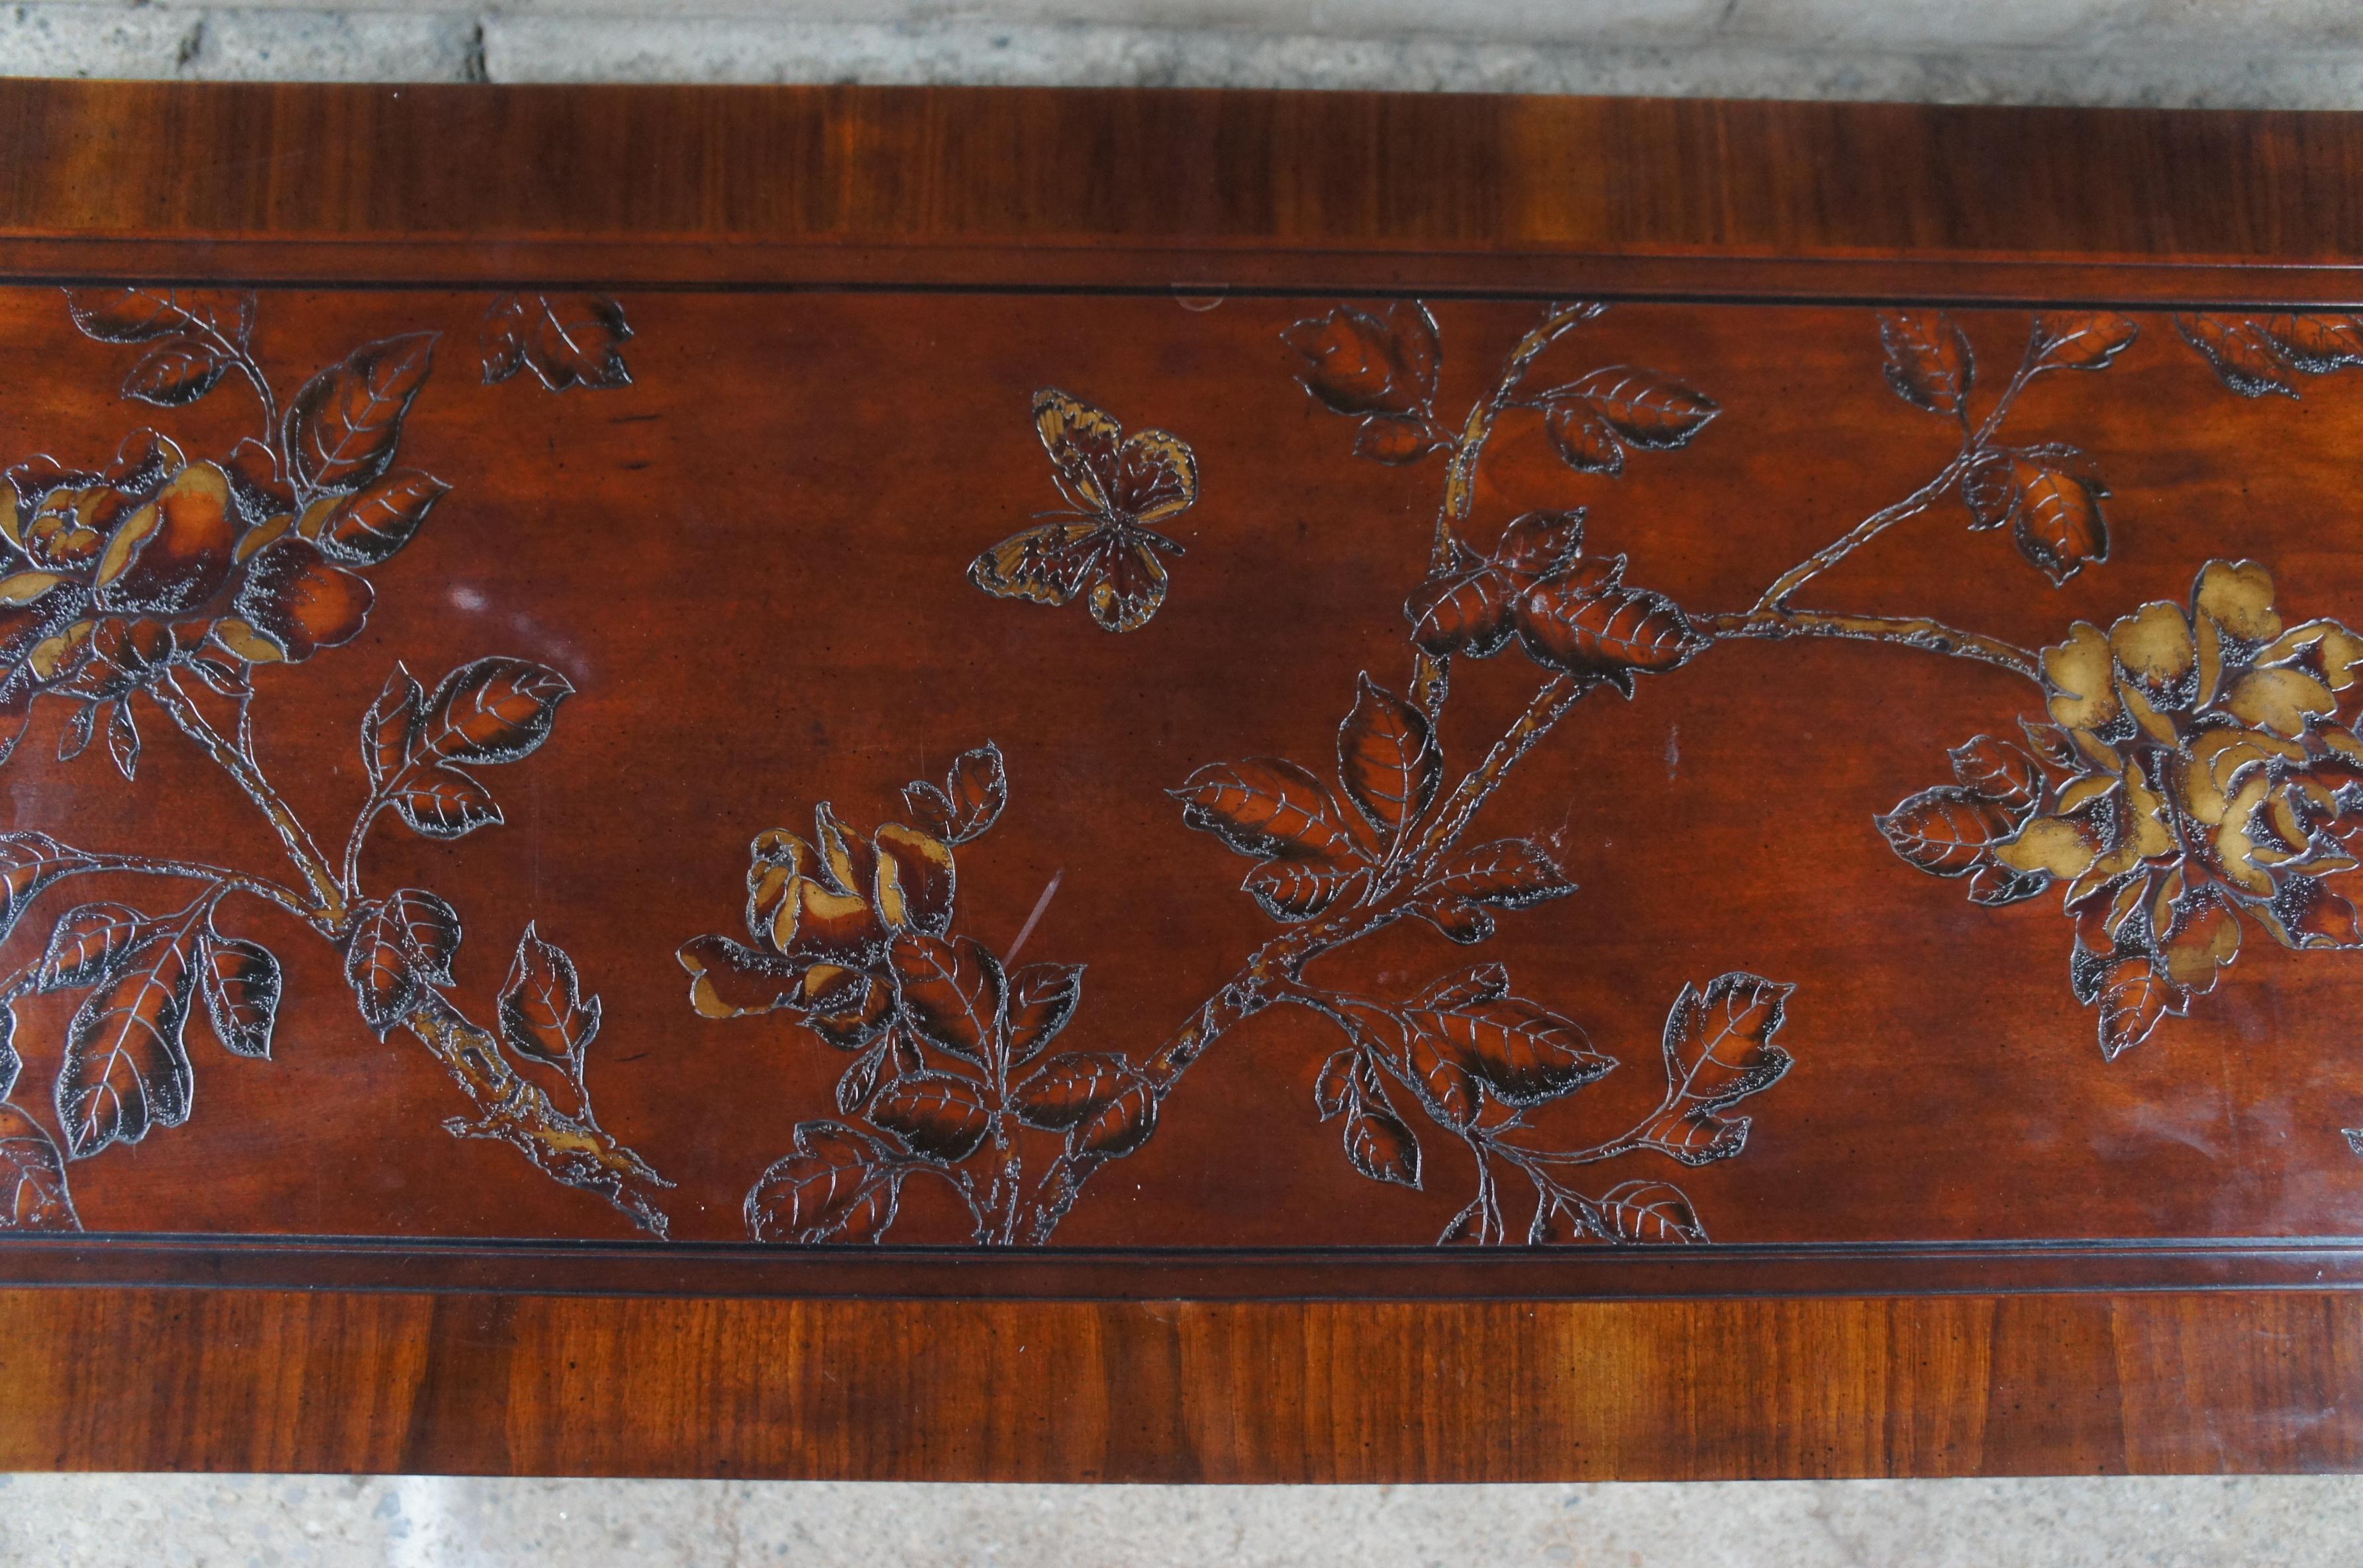 Drexel Heritage Mahogany Chinoiserie Connoisseur Sideboard Buffet Credenza 68